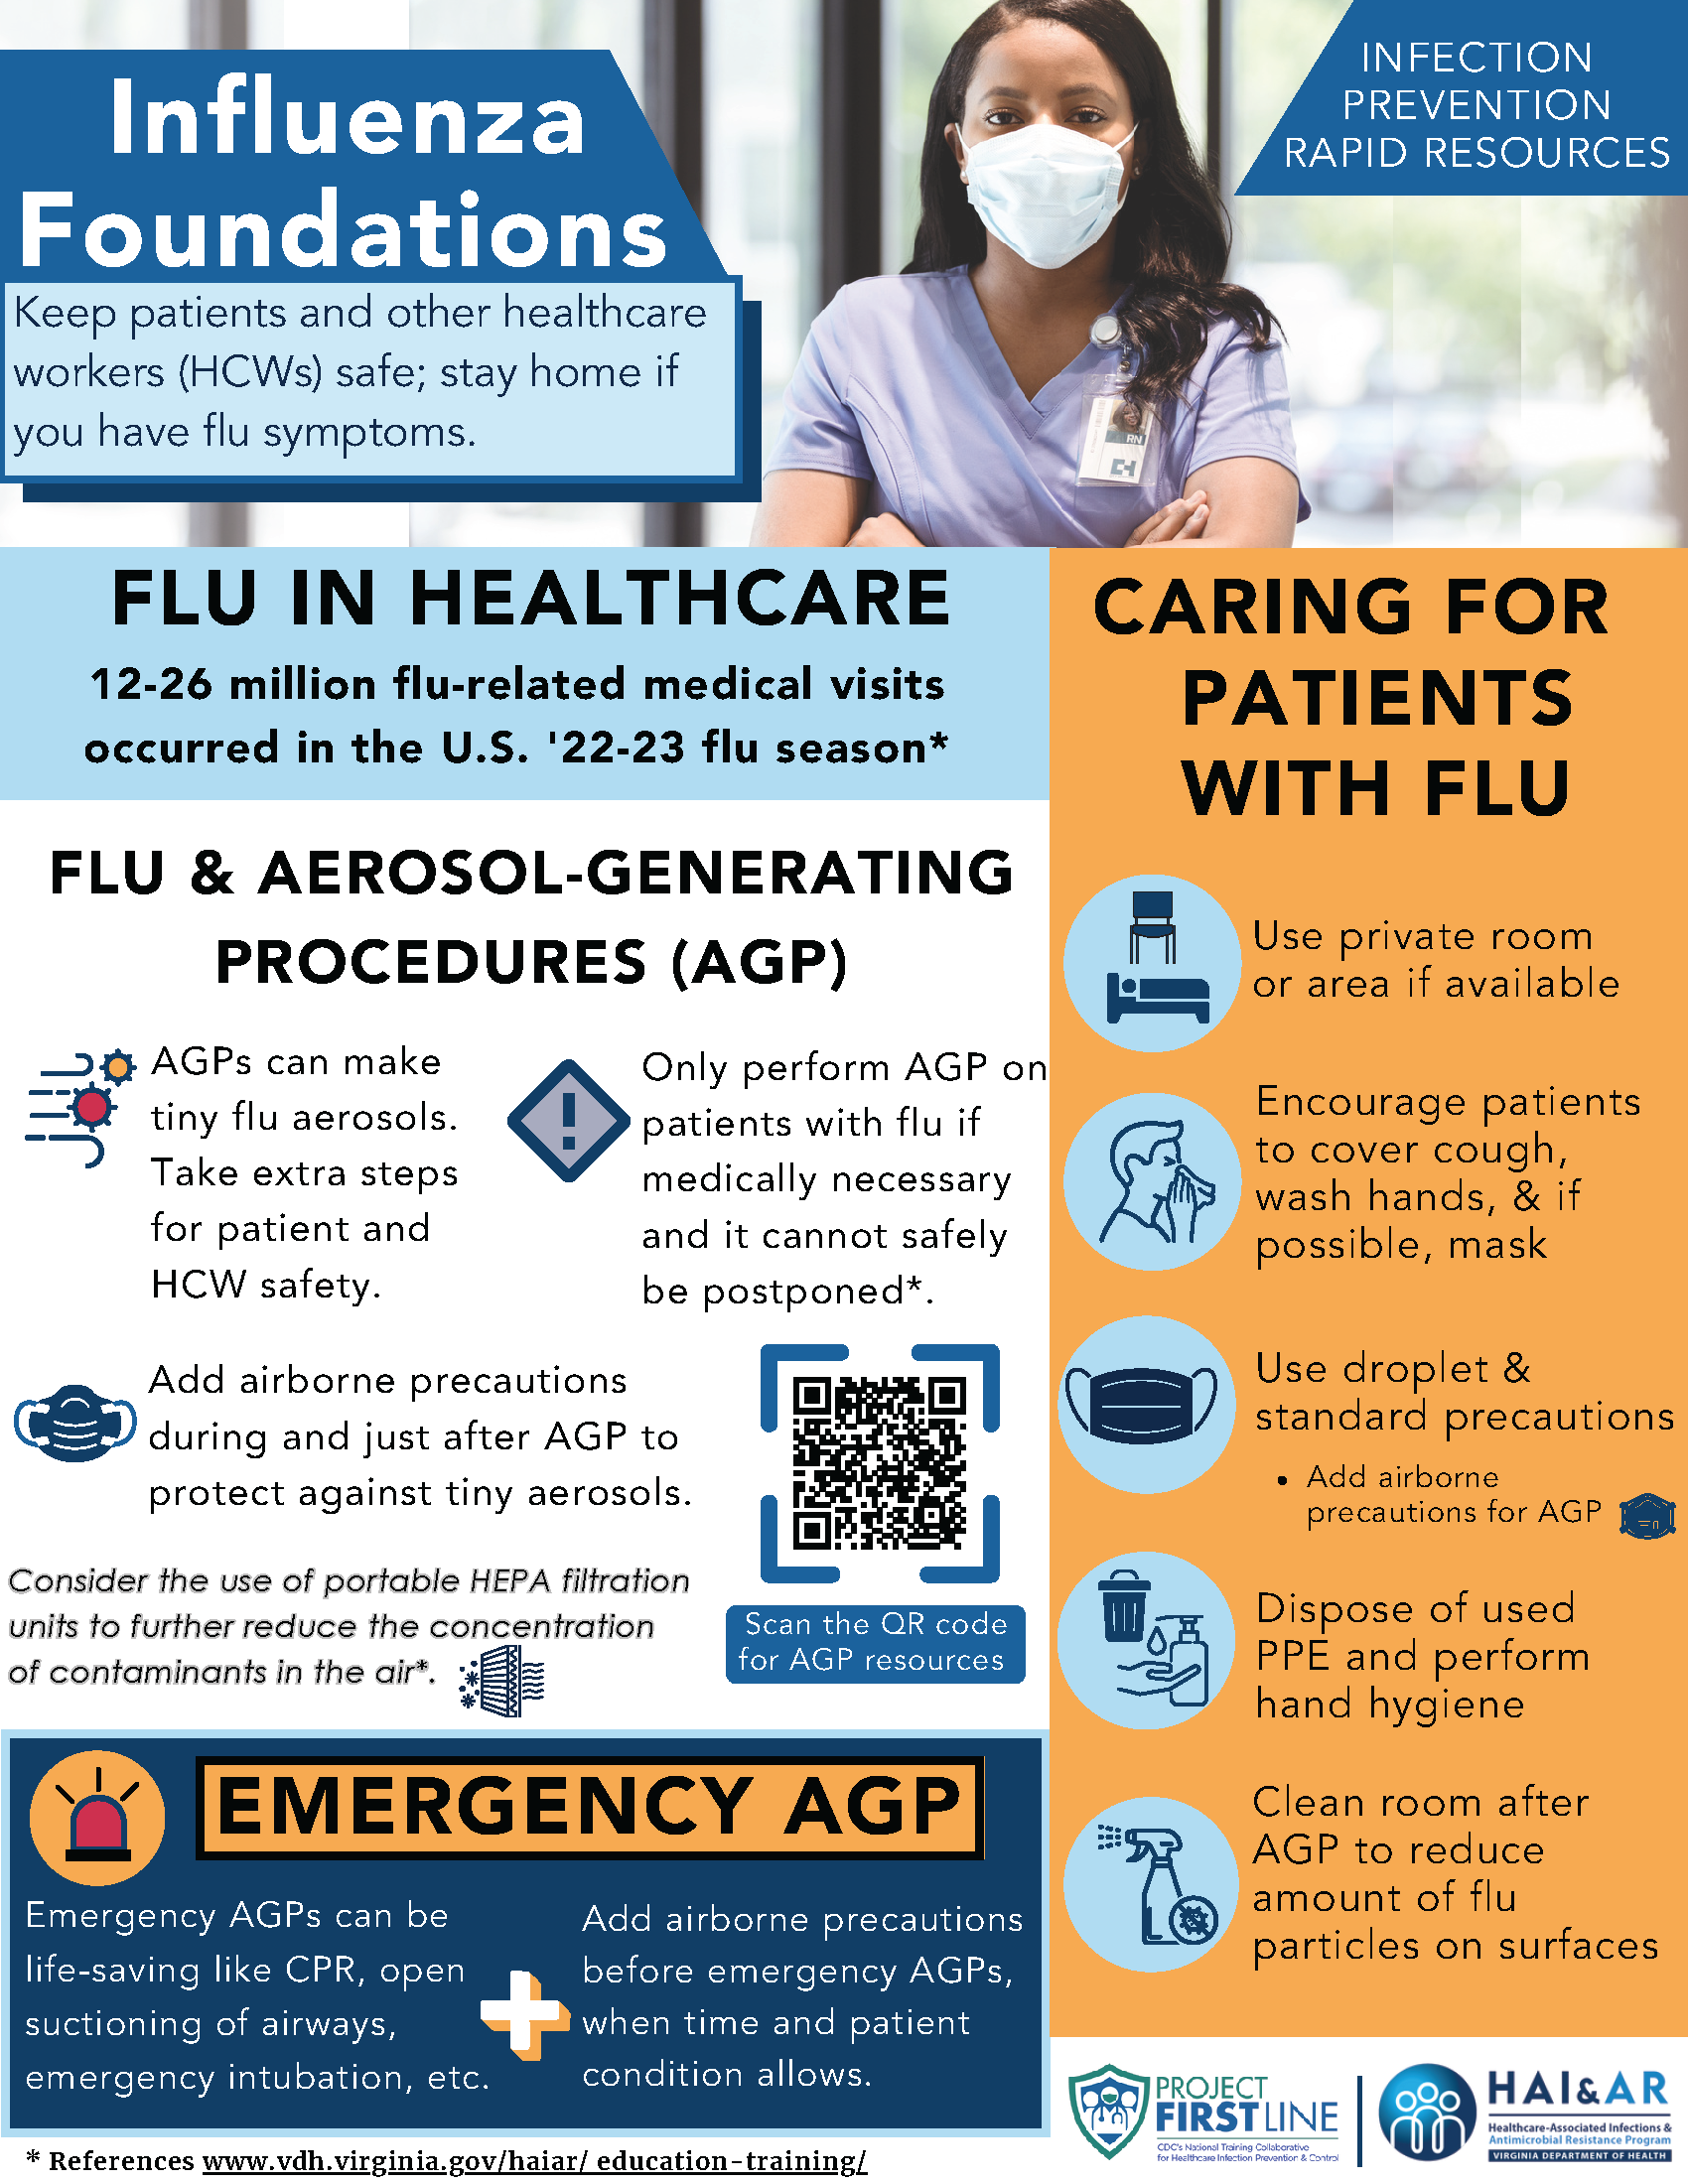 Image of the Influenza Foundations Flyer.